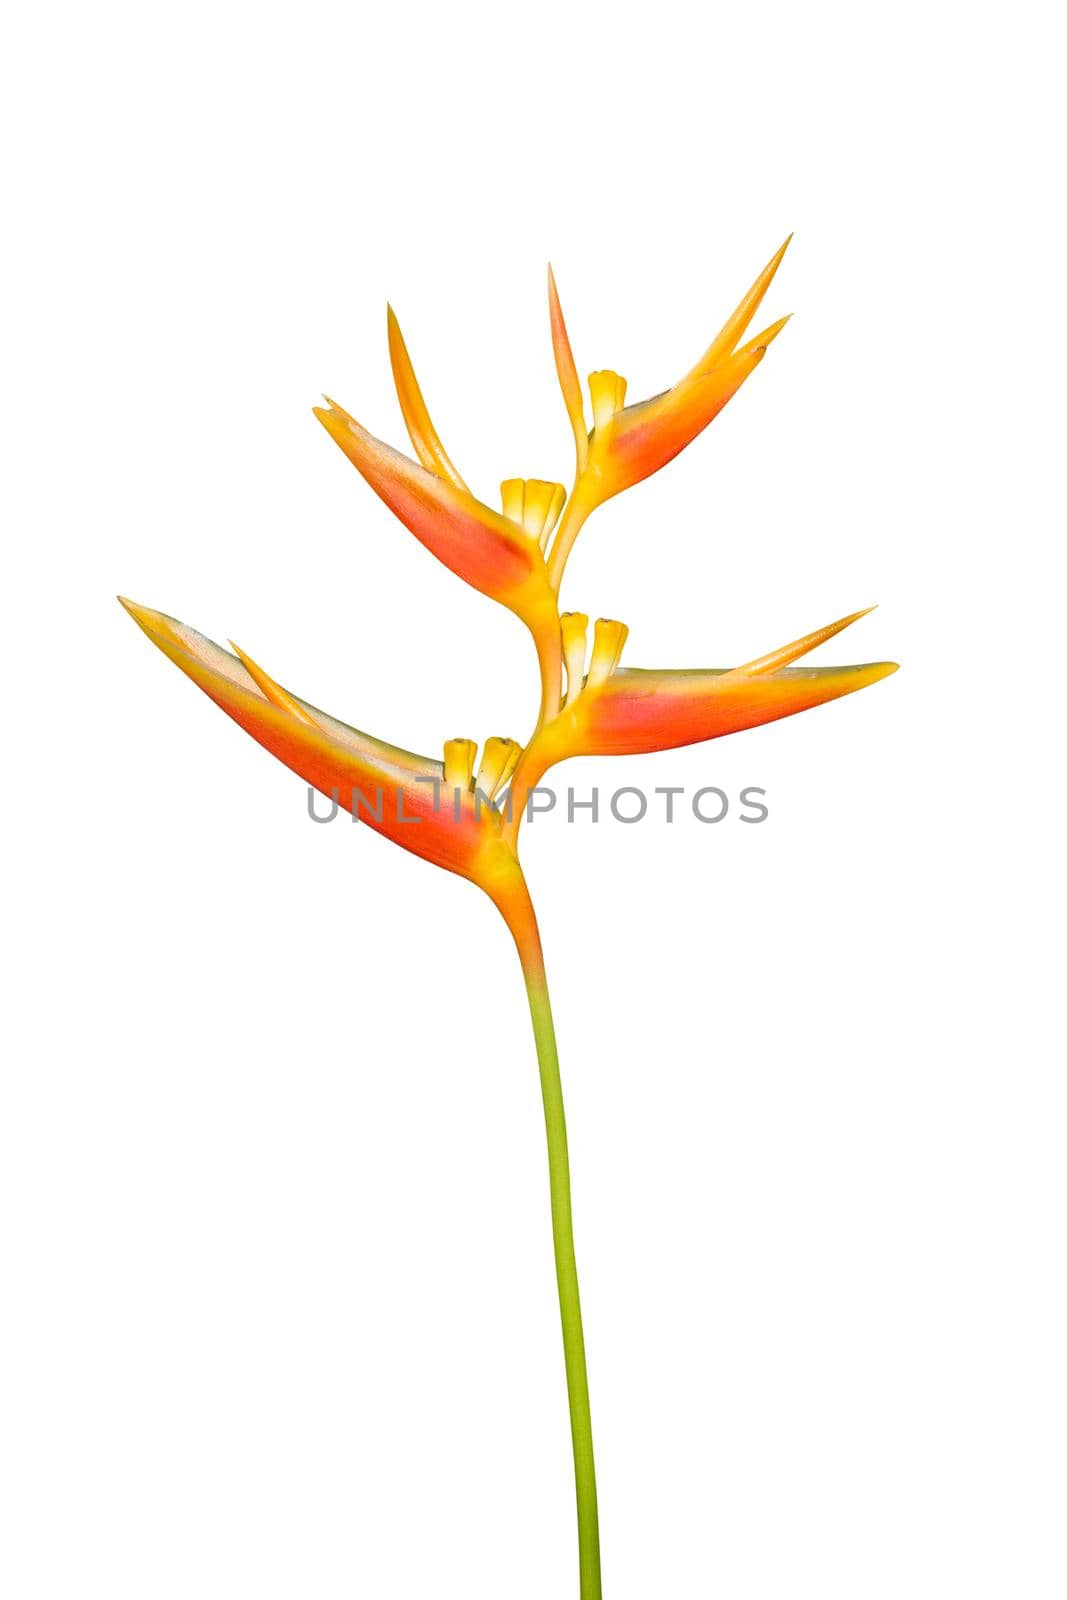 Bird of Paradise Flower isolated on white background, clipping path